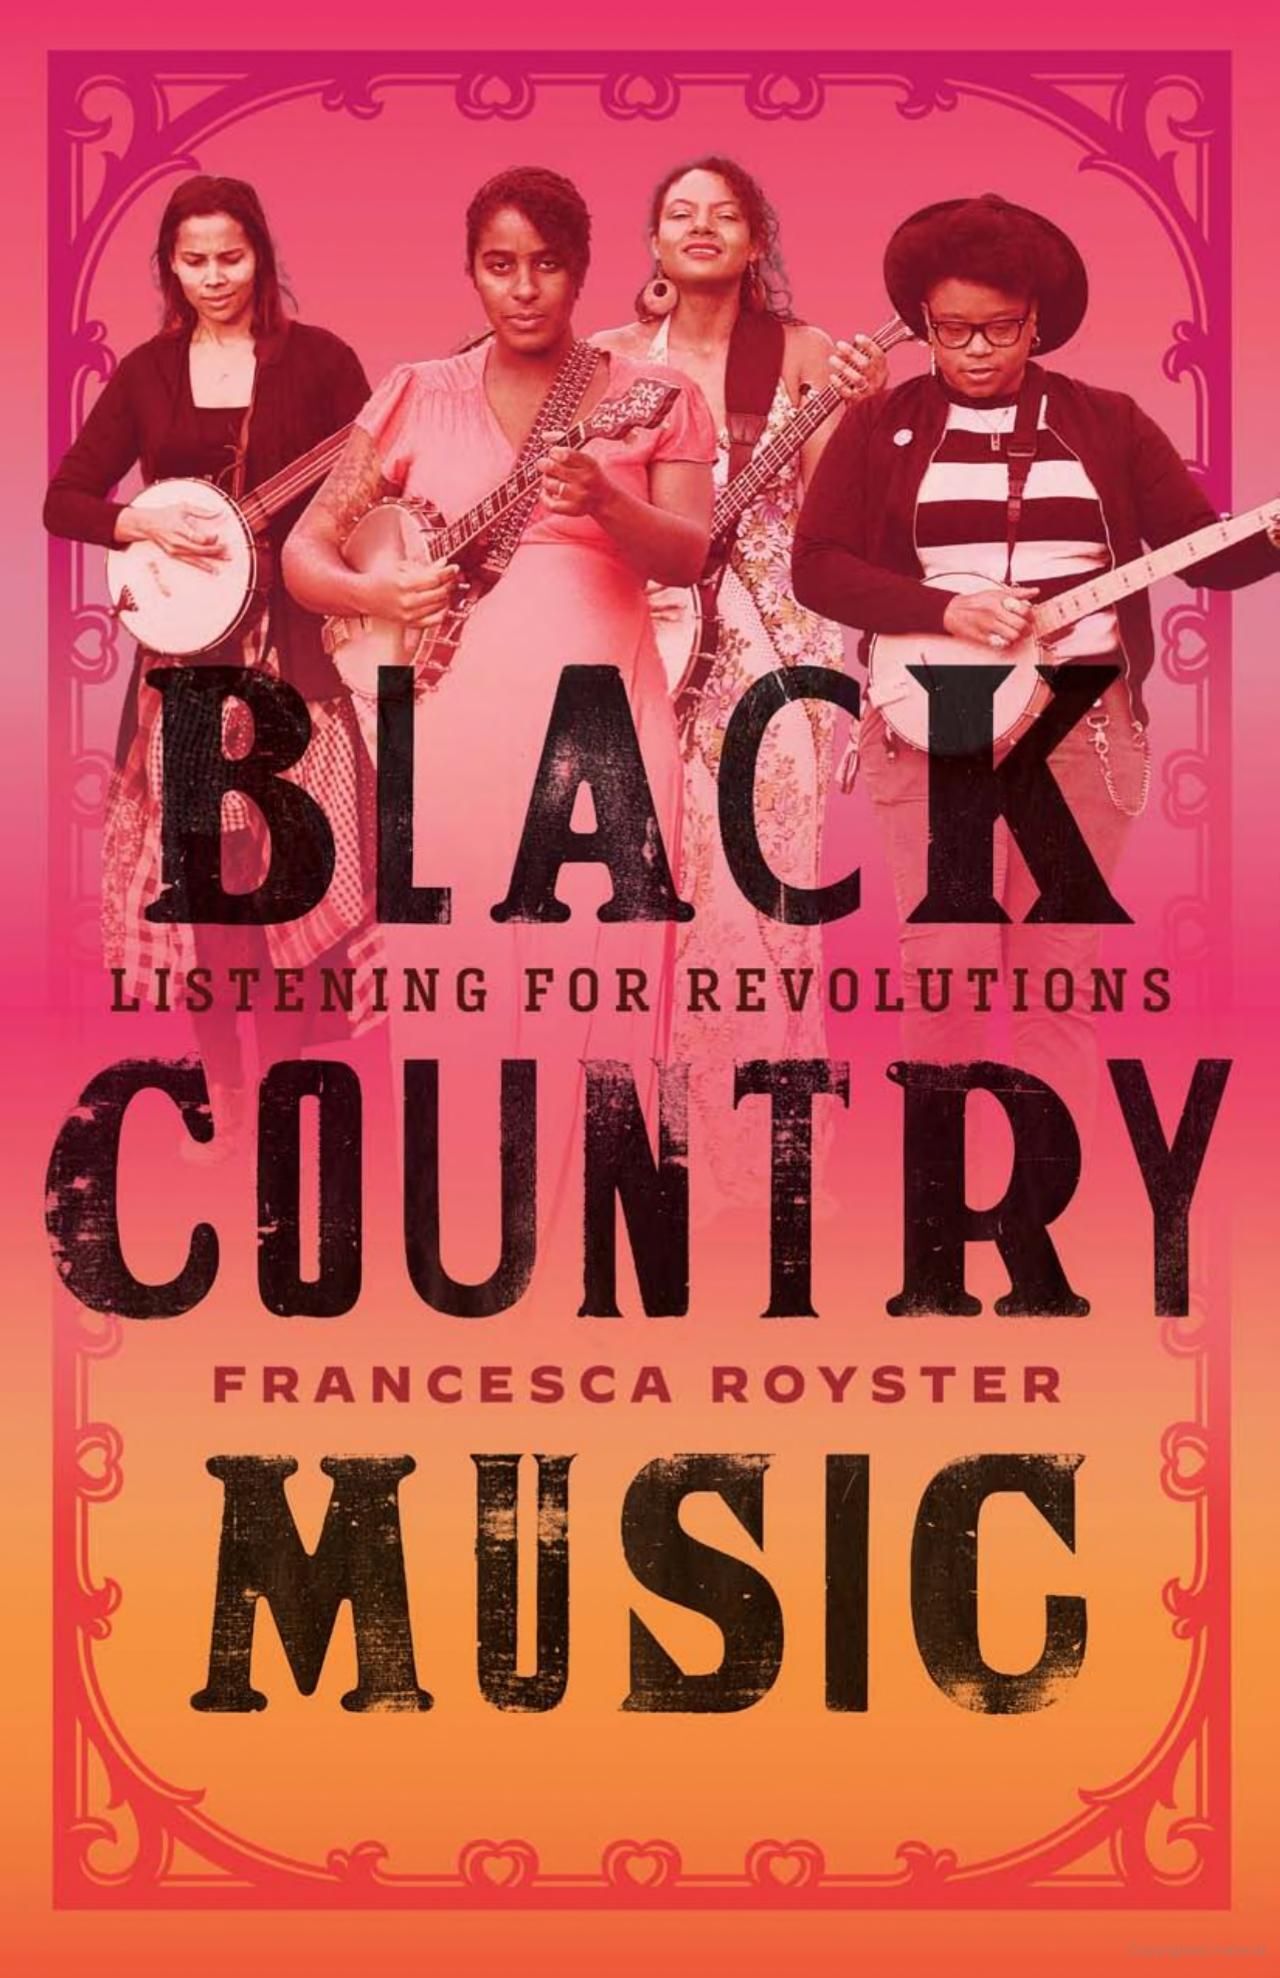 March book club selection by Francesca Royster